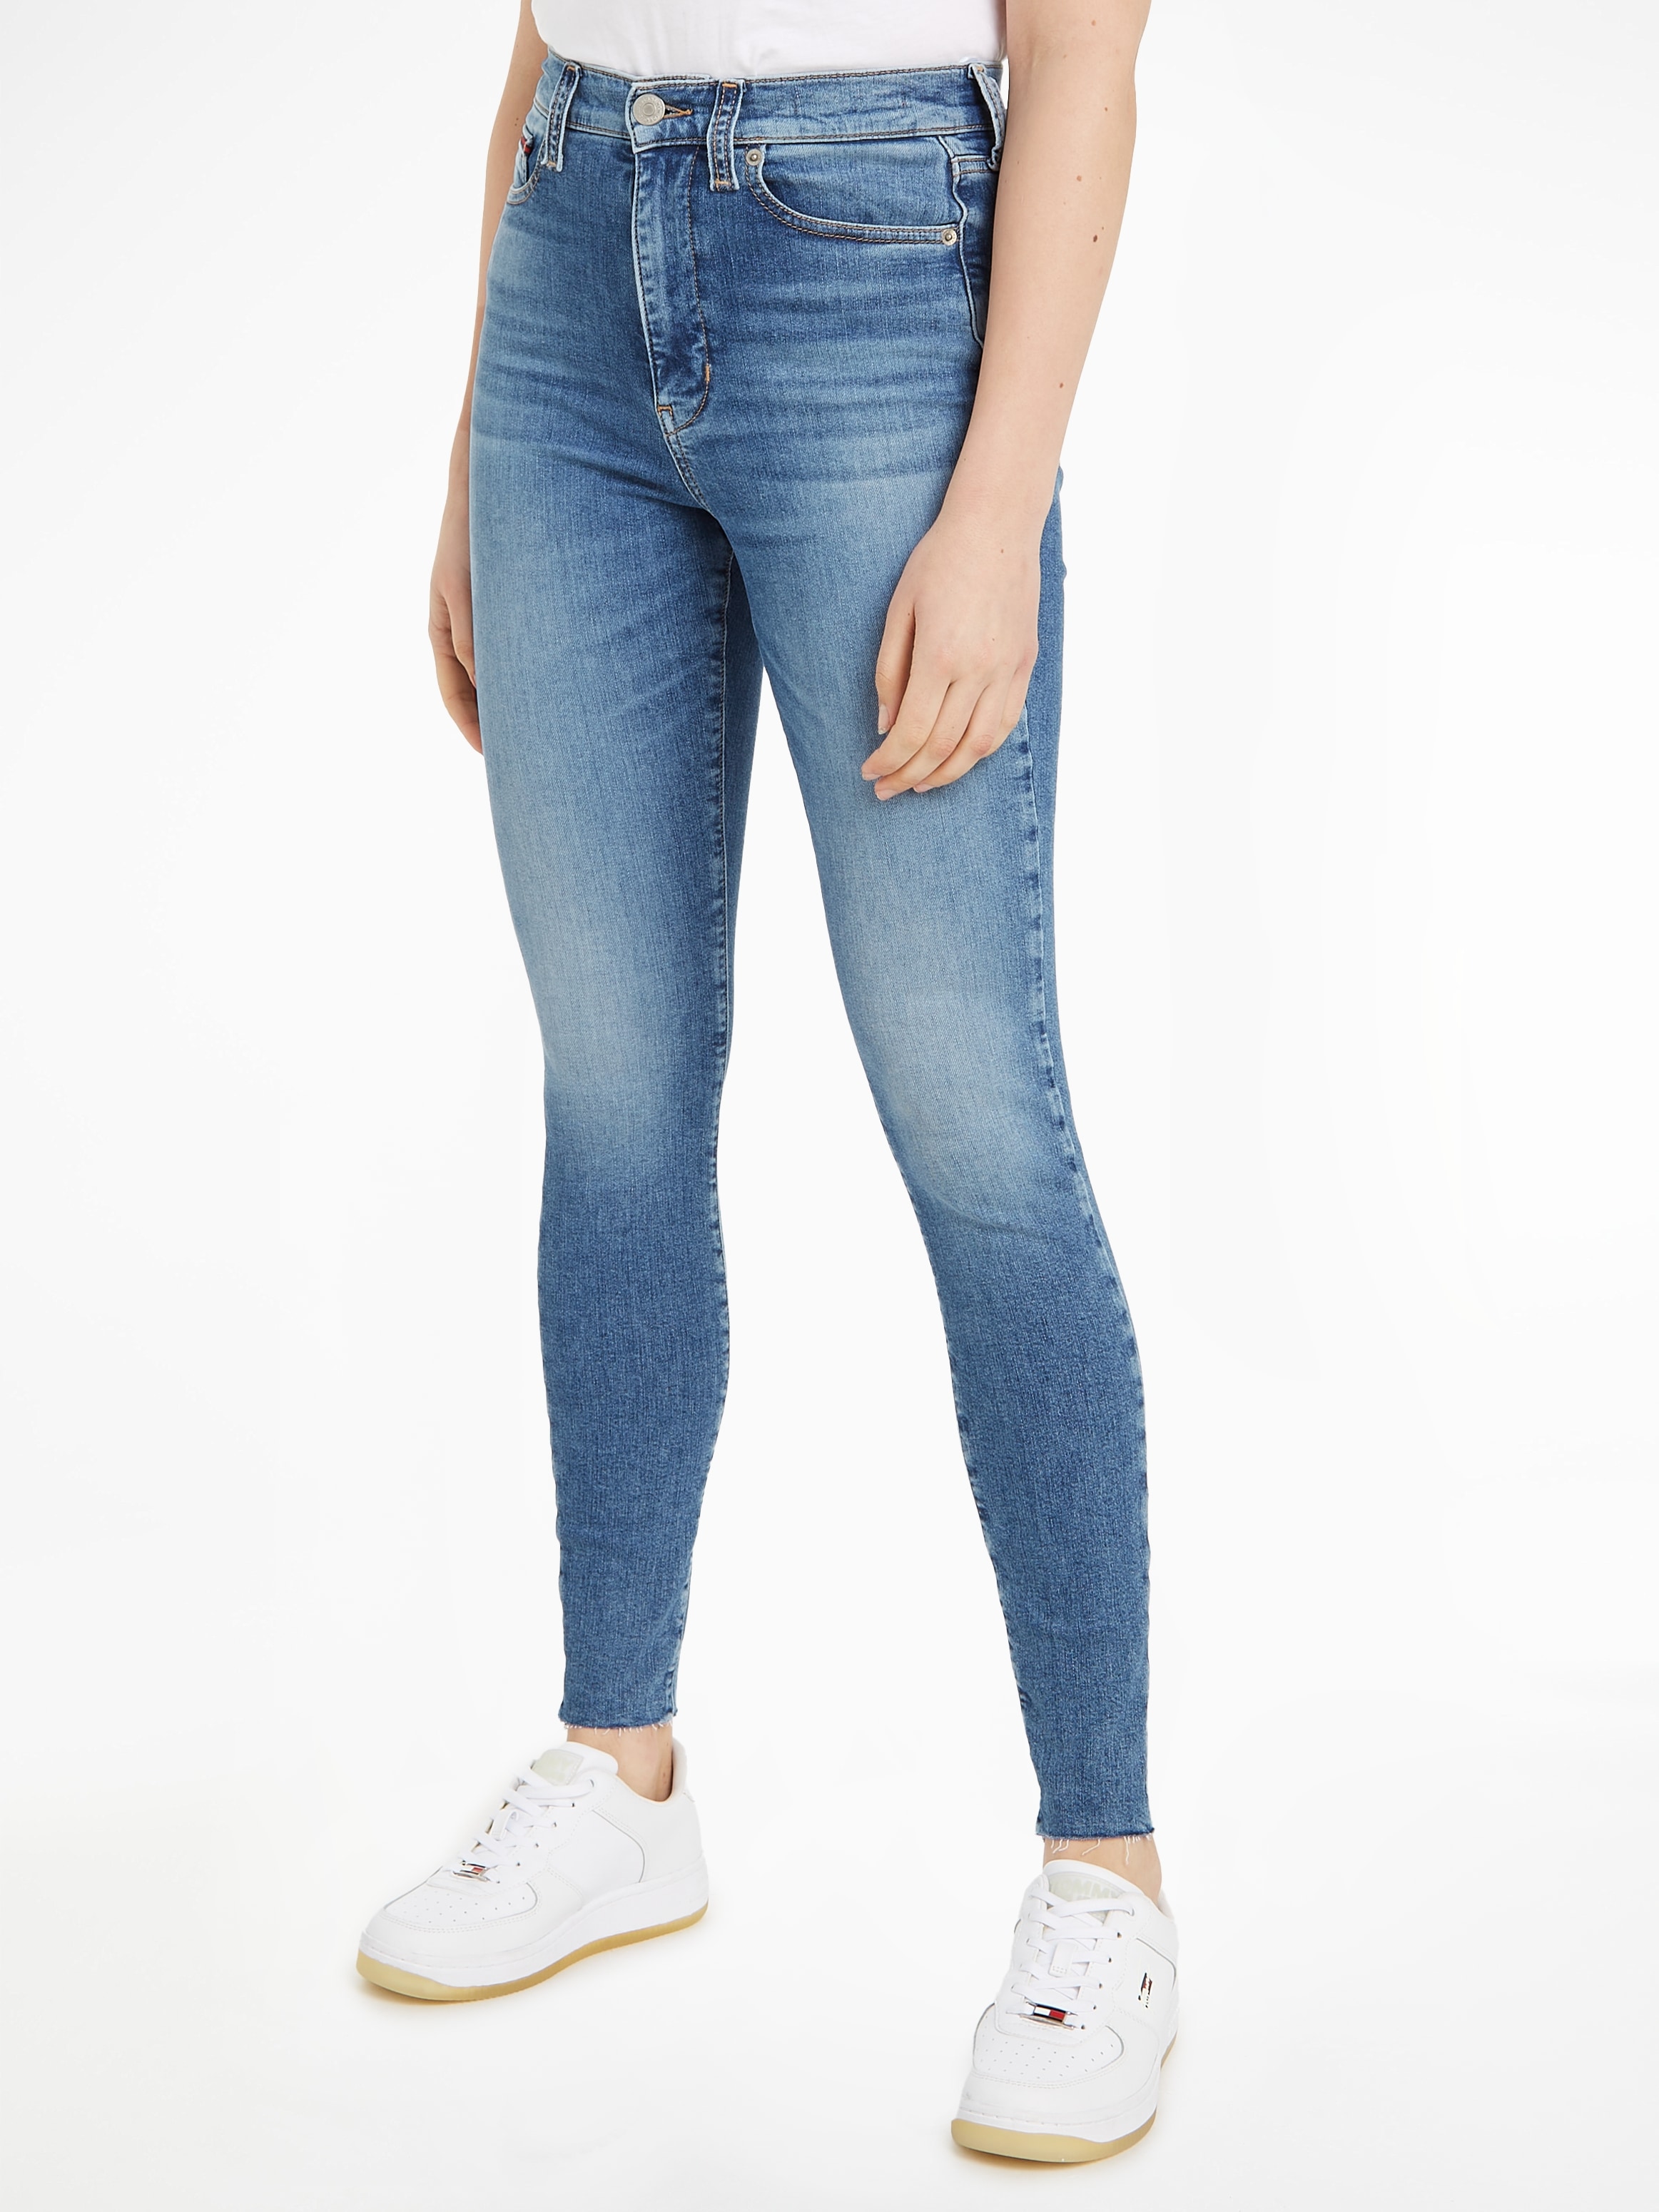 Tommy Jeans Skinny-fit-Jeans I\'m und SYLVIA walking Logobadge | »Jeans Labelflags CG4«, mit HR shoppen SSKN